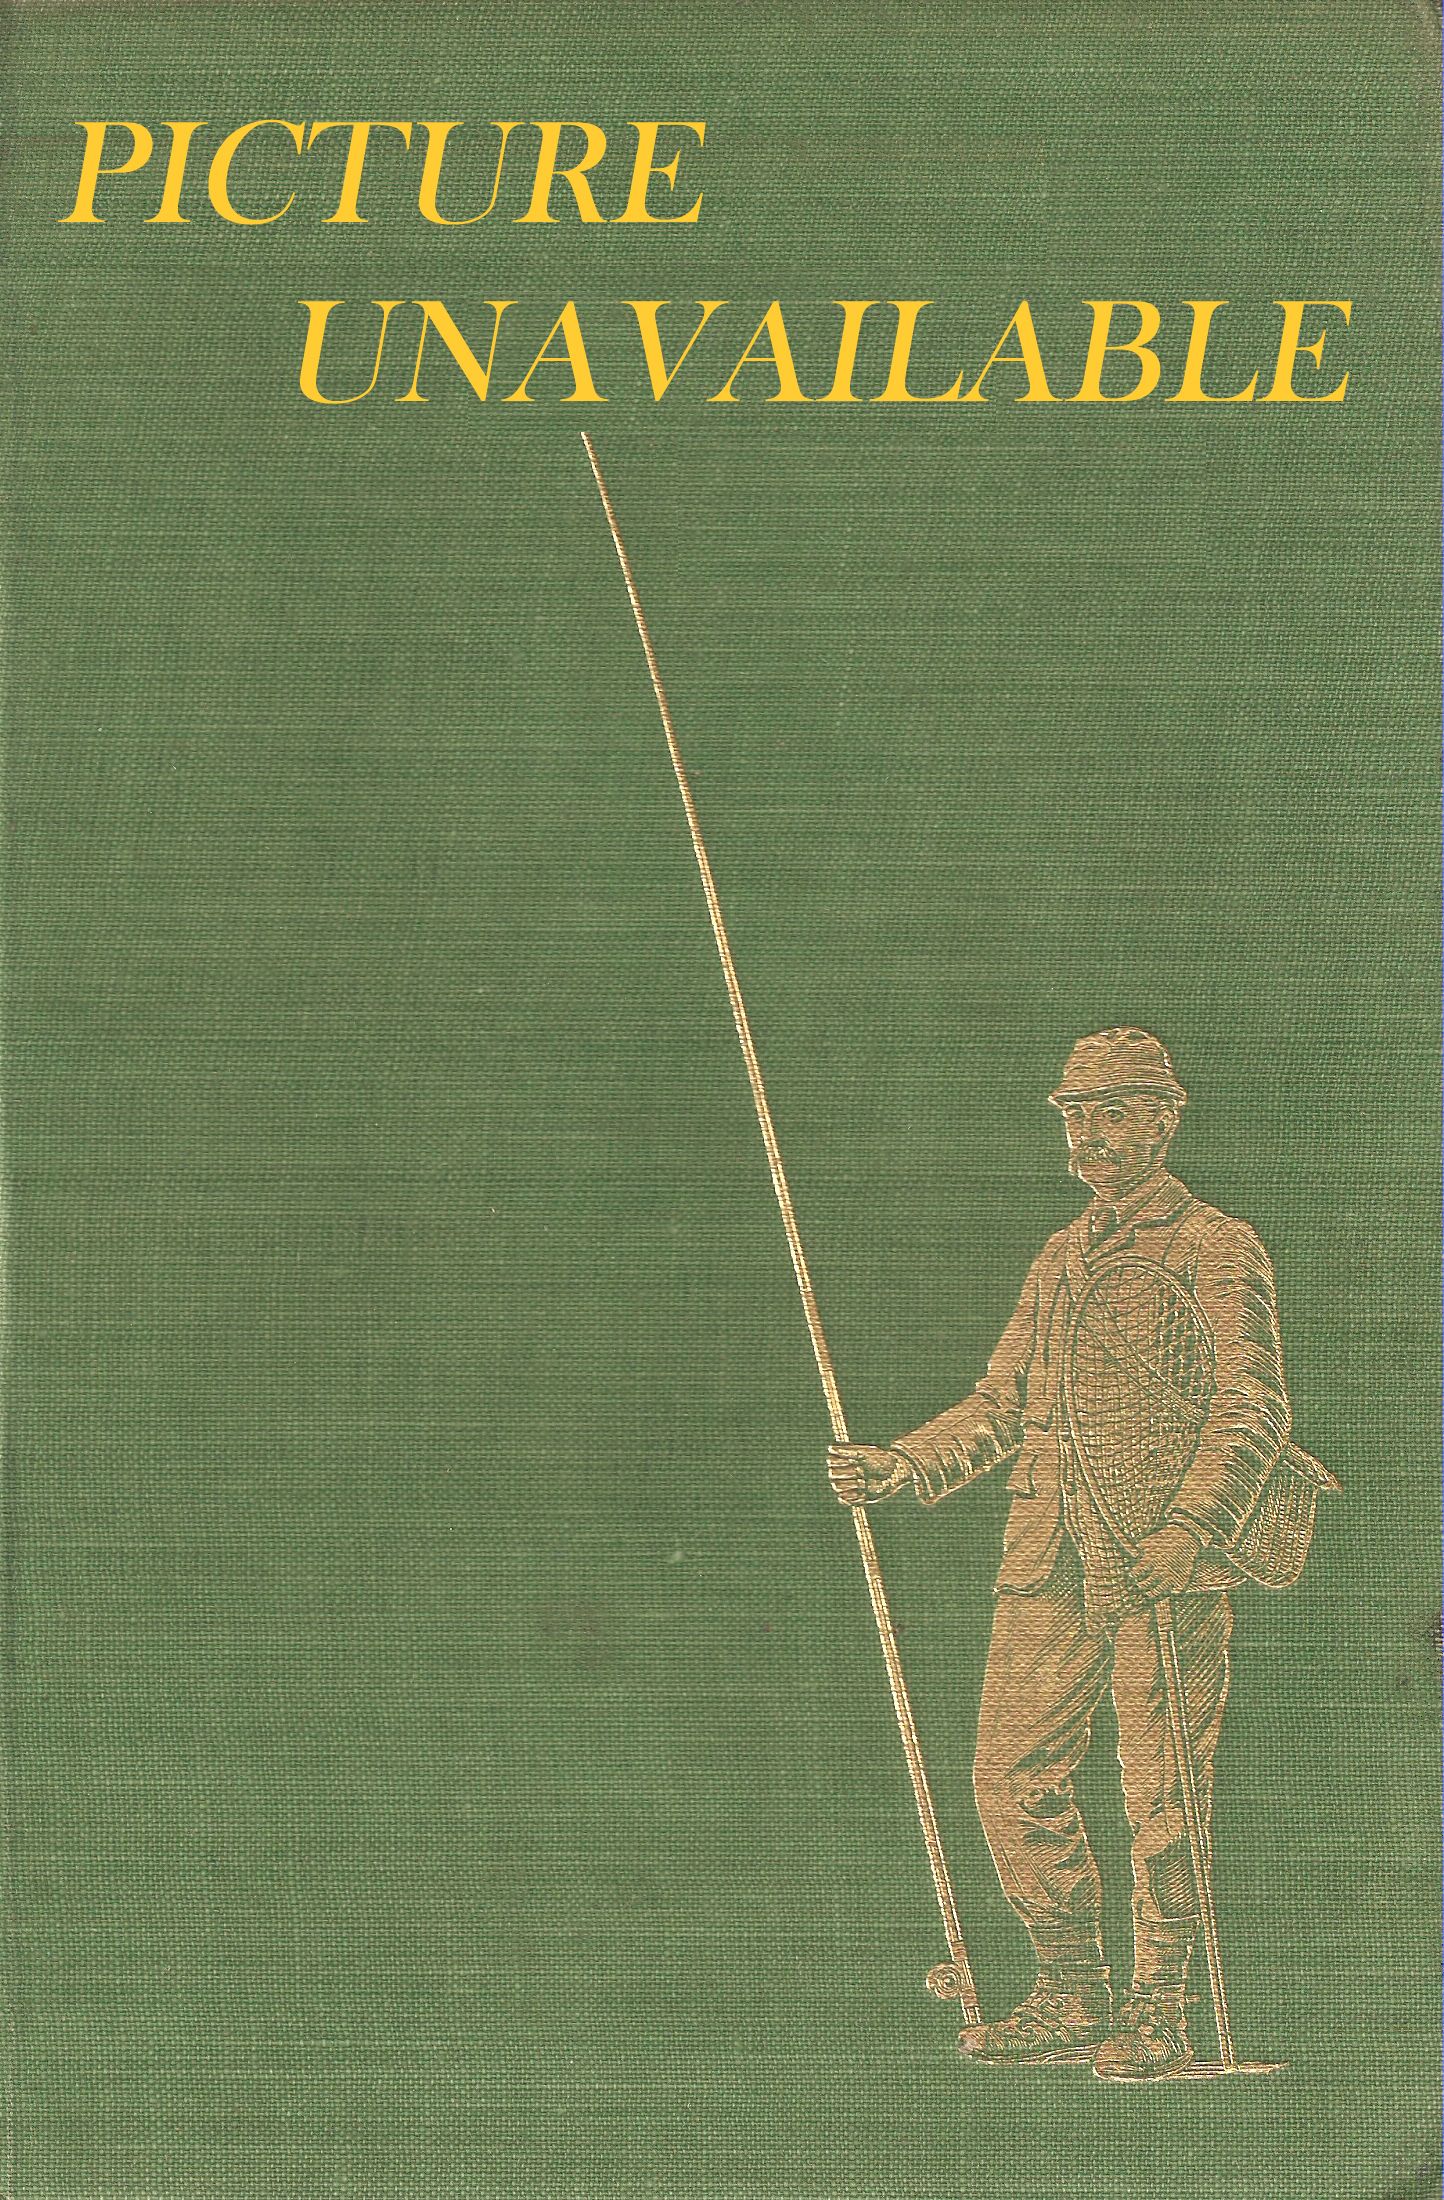 FLYFISHERS' JOURNAL: THE JOURNAL OF THE FLYFISHERS' CLUB. Winter 1983.  Volume 72. Number 277.